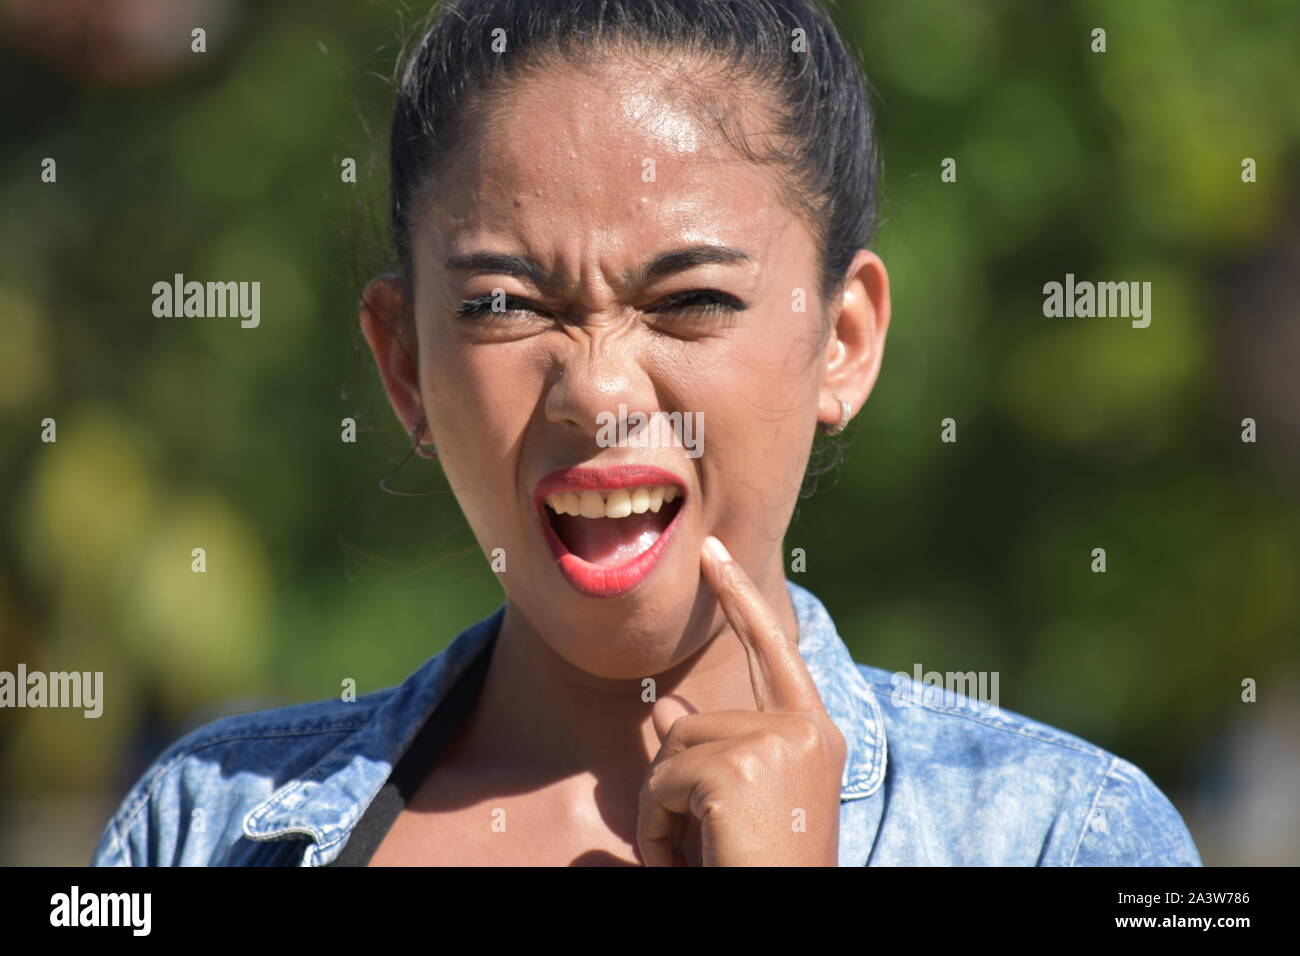 Female With Toothache Stock Photo